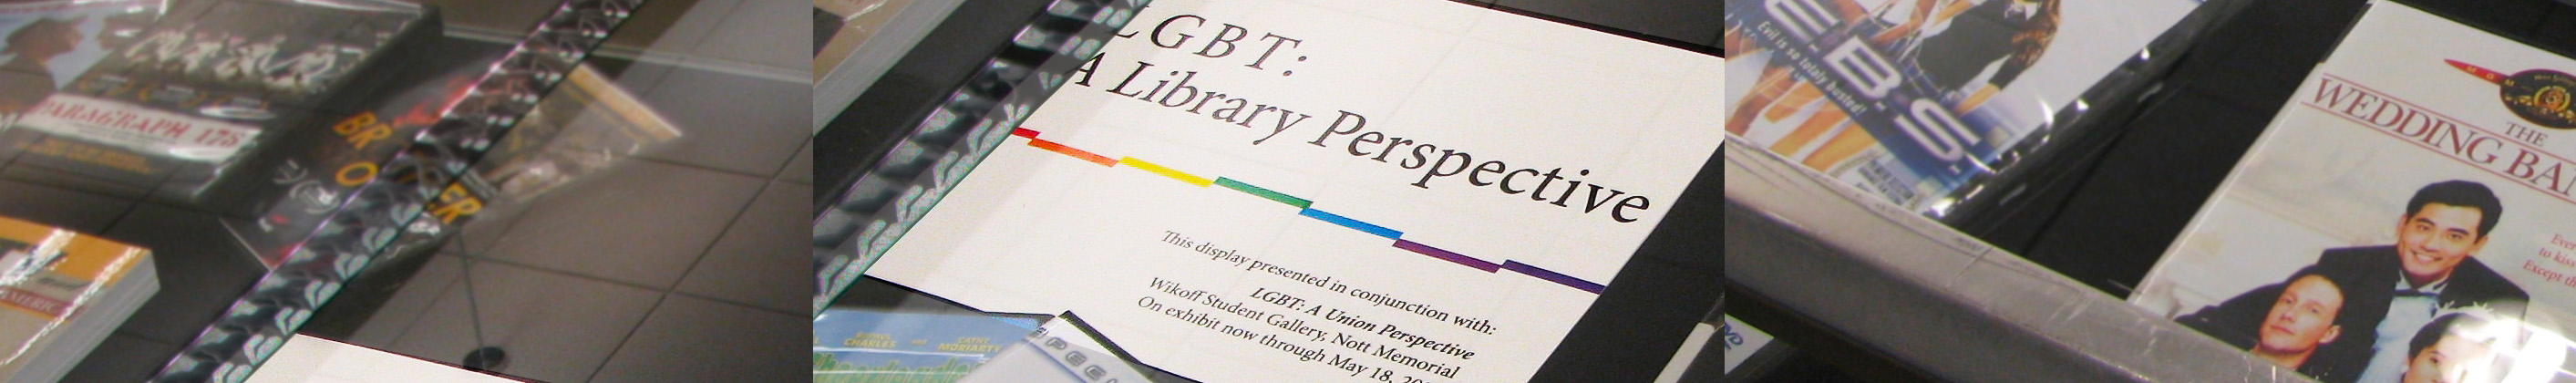 LGBTQ a library perspective 2008